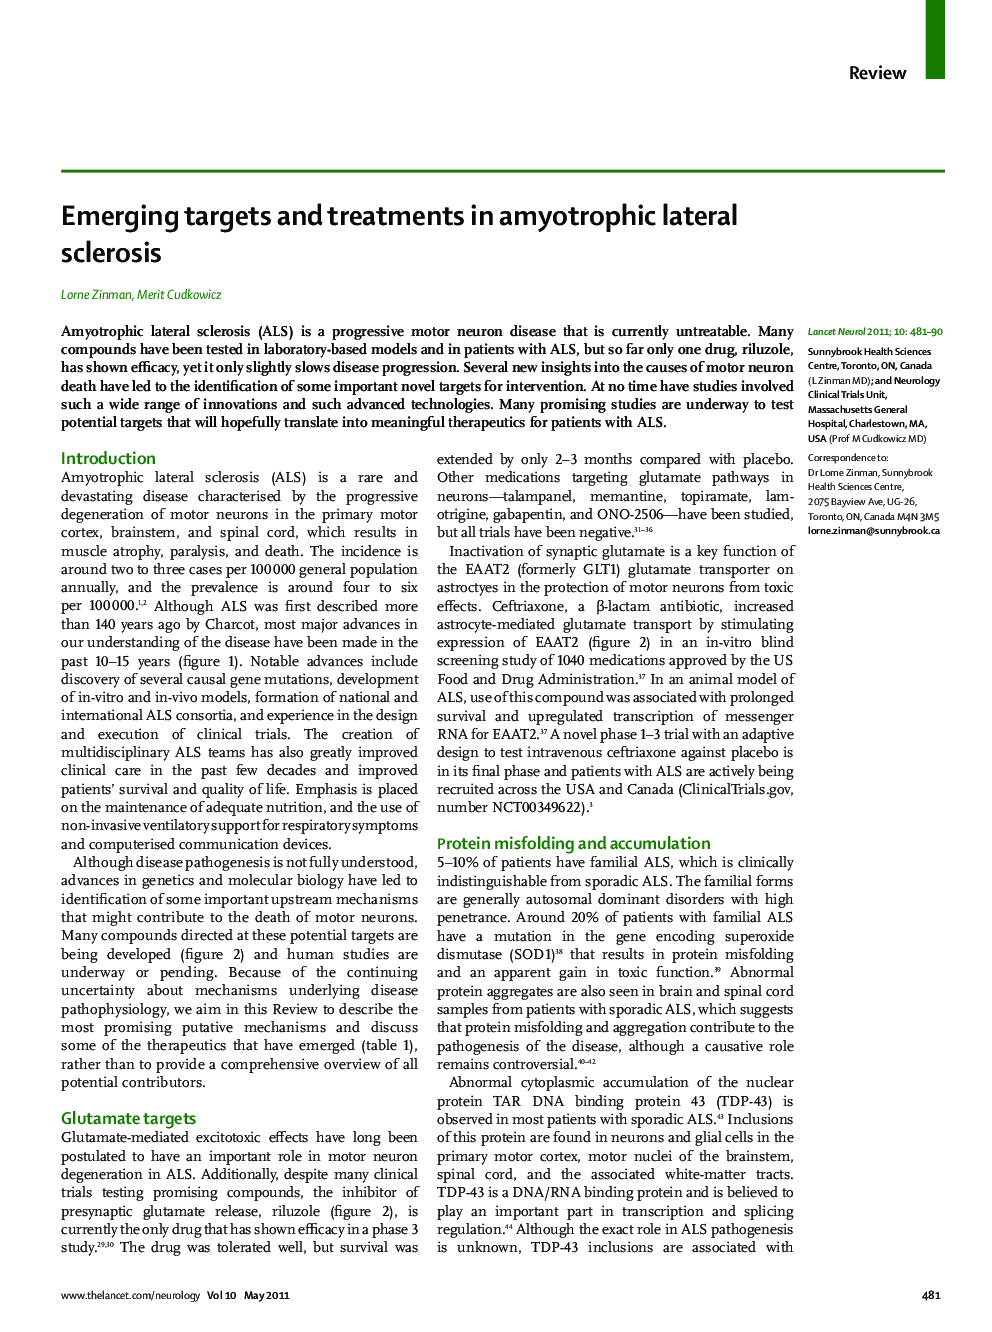 Emerging targets and treatments in amyotrophic lateral sclerosis